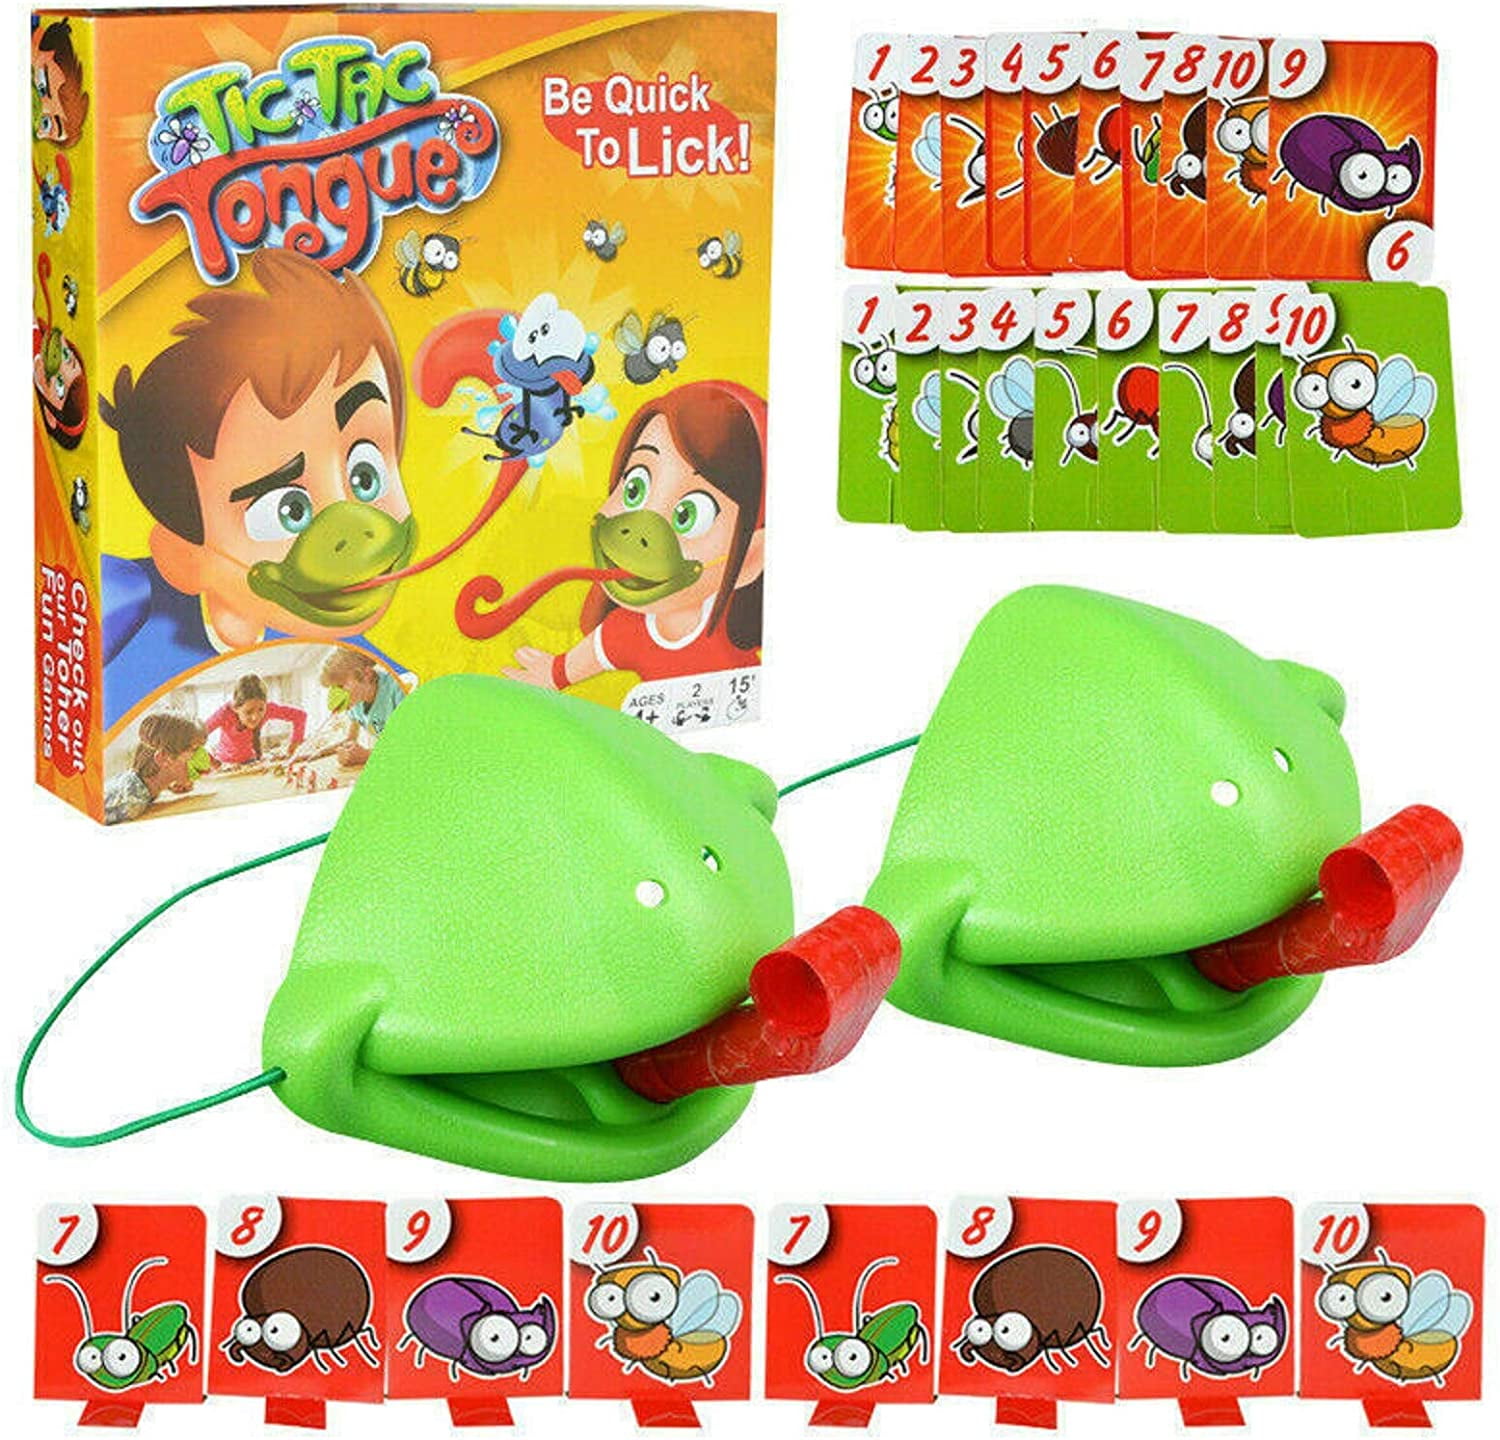 Frog Card Toys Greedy Chameleon Sticking Tongue Out Desktop Toy 